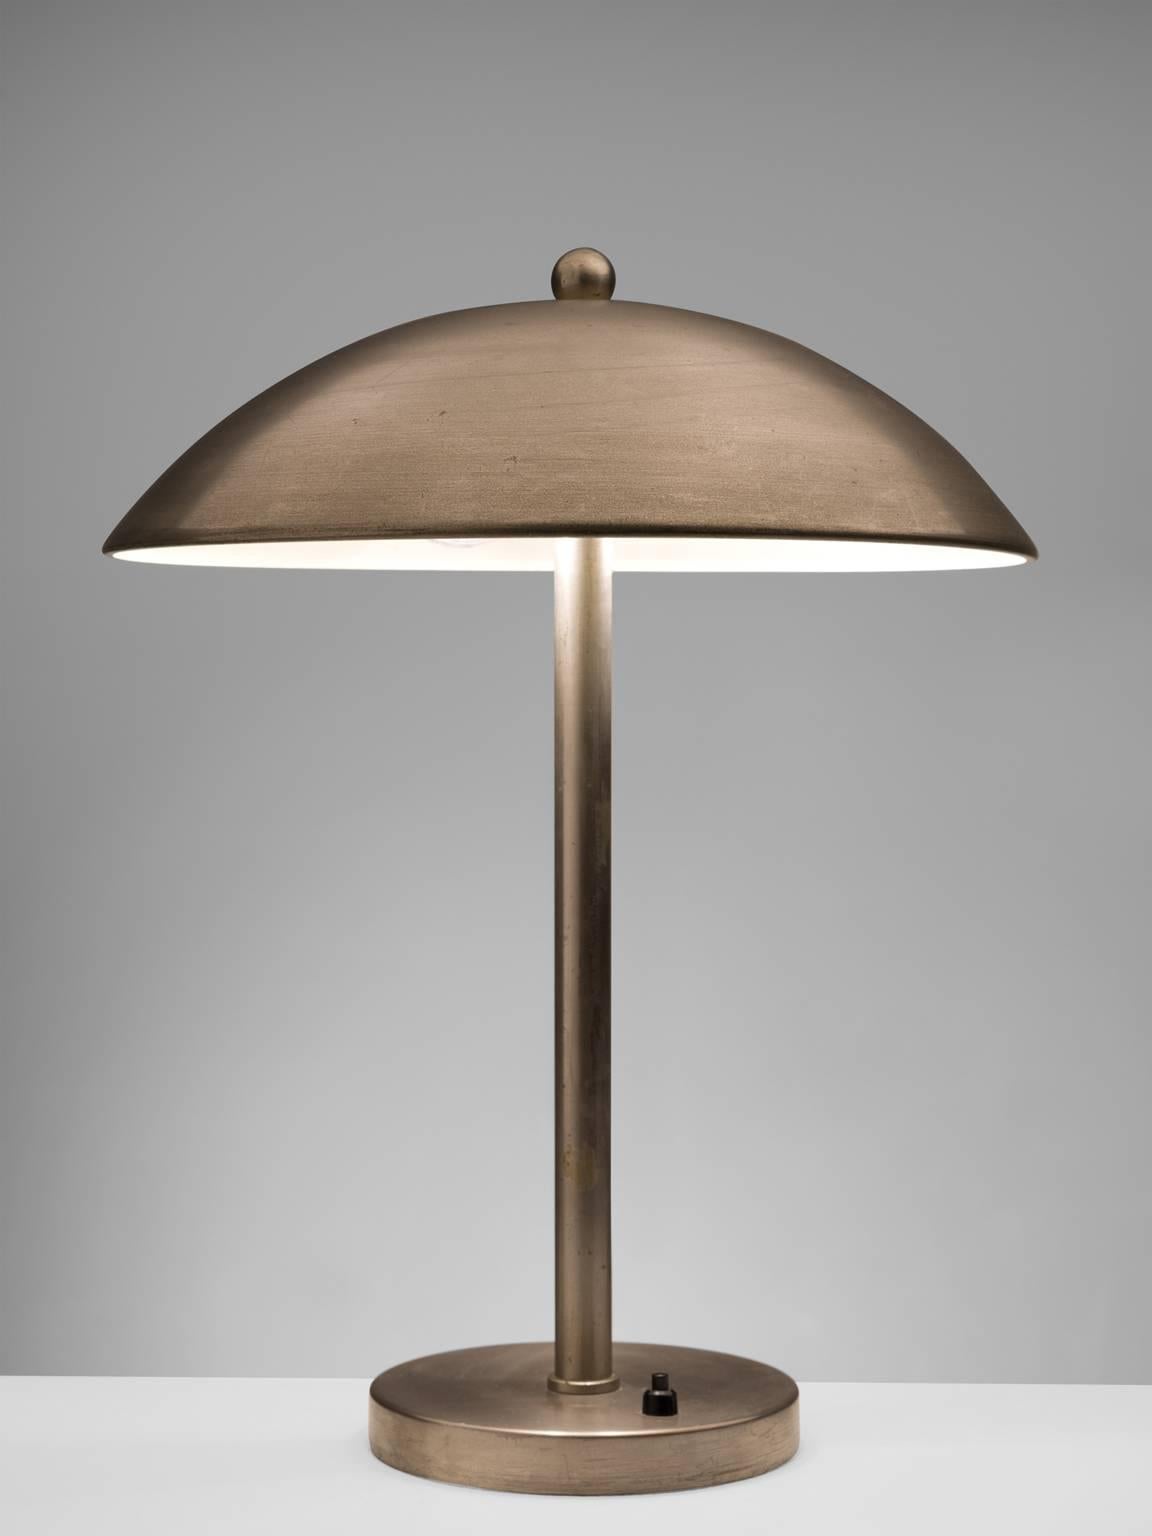 Table lamp, nickel, Europe, 1970s.

This desk lamp made out of nickel is functional and elegant at the same time. The rounded shade combined with the straight pole and small base resemble the classic shape of art deco, 1930s desk lamps. The light